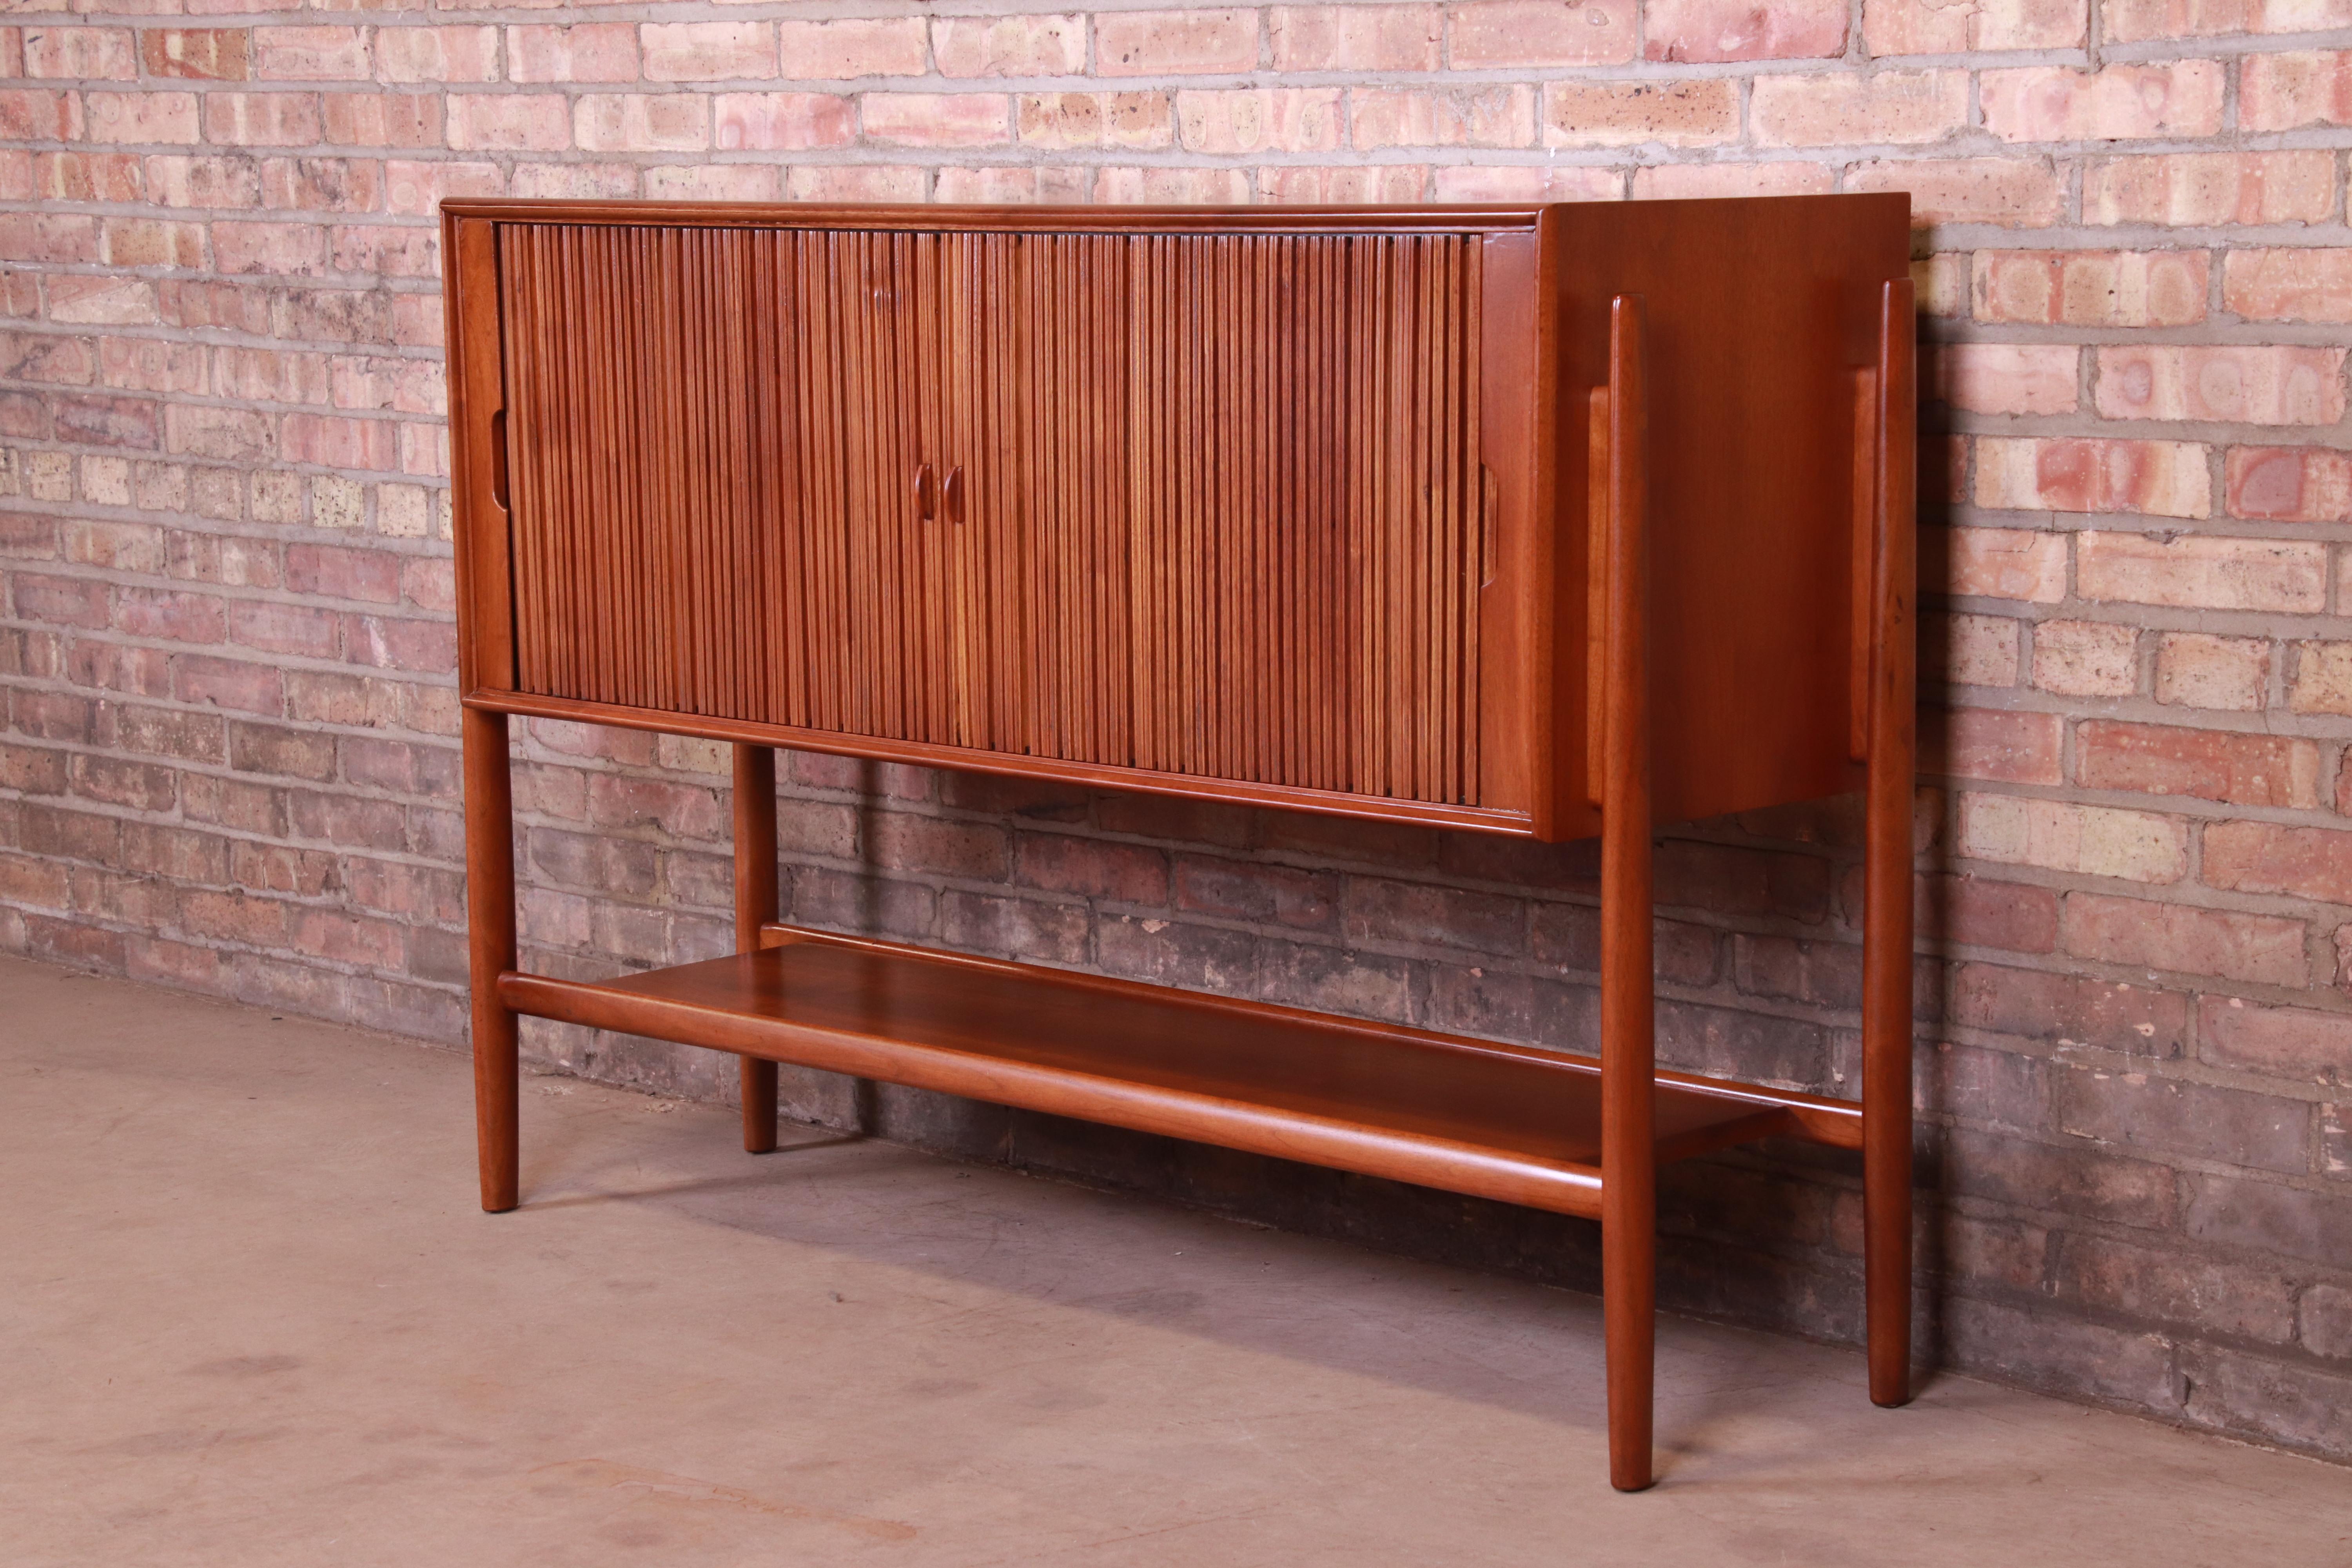 An exceptional Mid-Century Modern walnut tambour door sideboard credenza or bar cabinet

Featuring sleek Danish-inspired design similar to pieces by Arne Vodder and Finn Juhl

By Barney Flagg for Drexel 